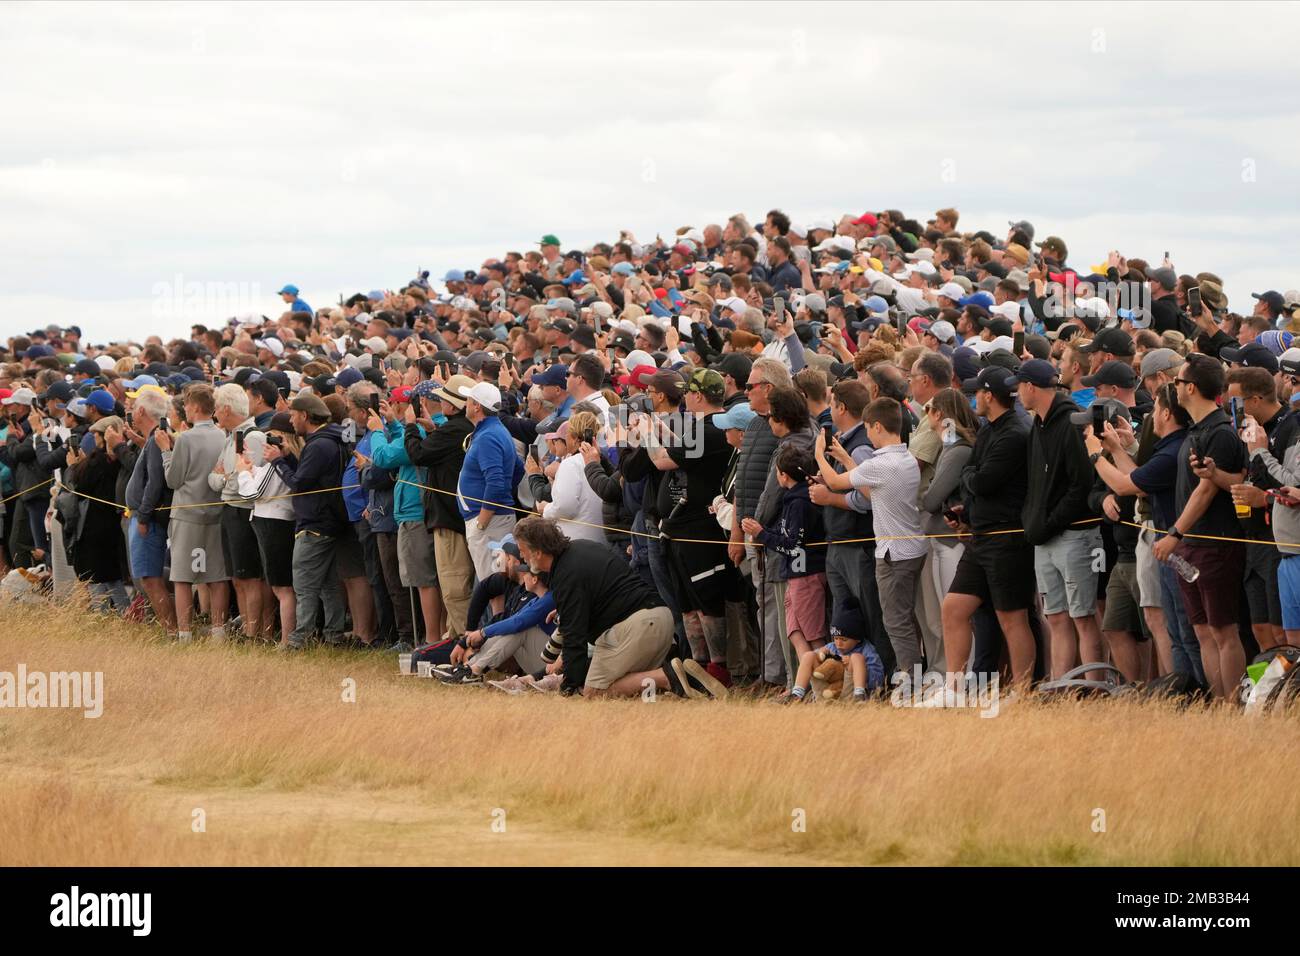 Spectators watch the first round of the British Open golf championship on the Old Course at St